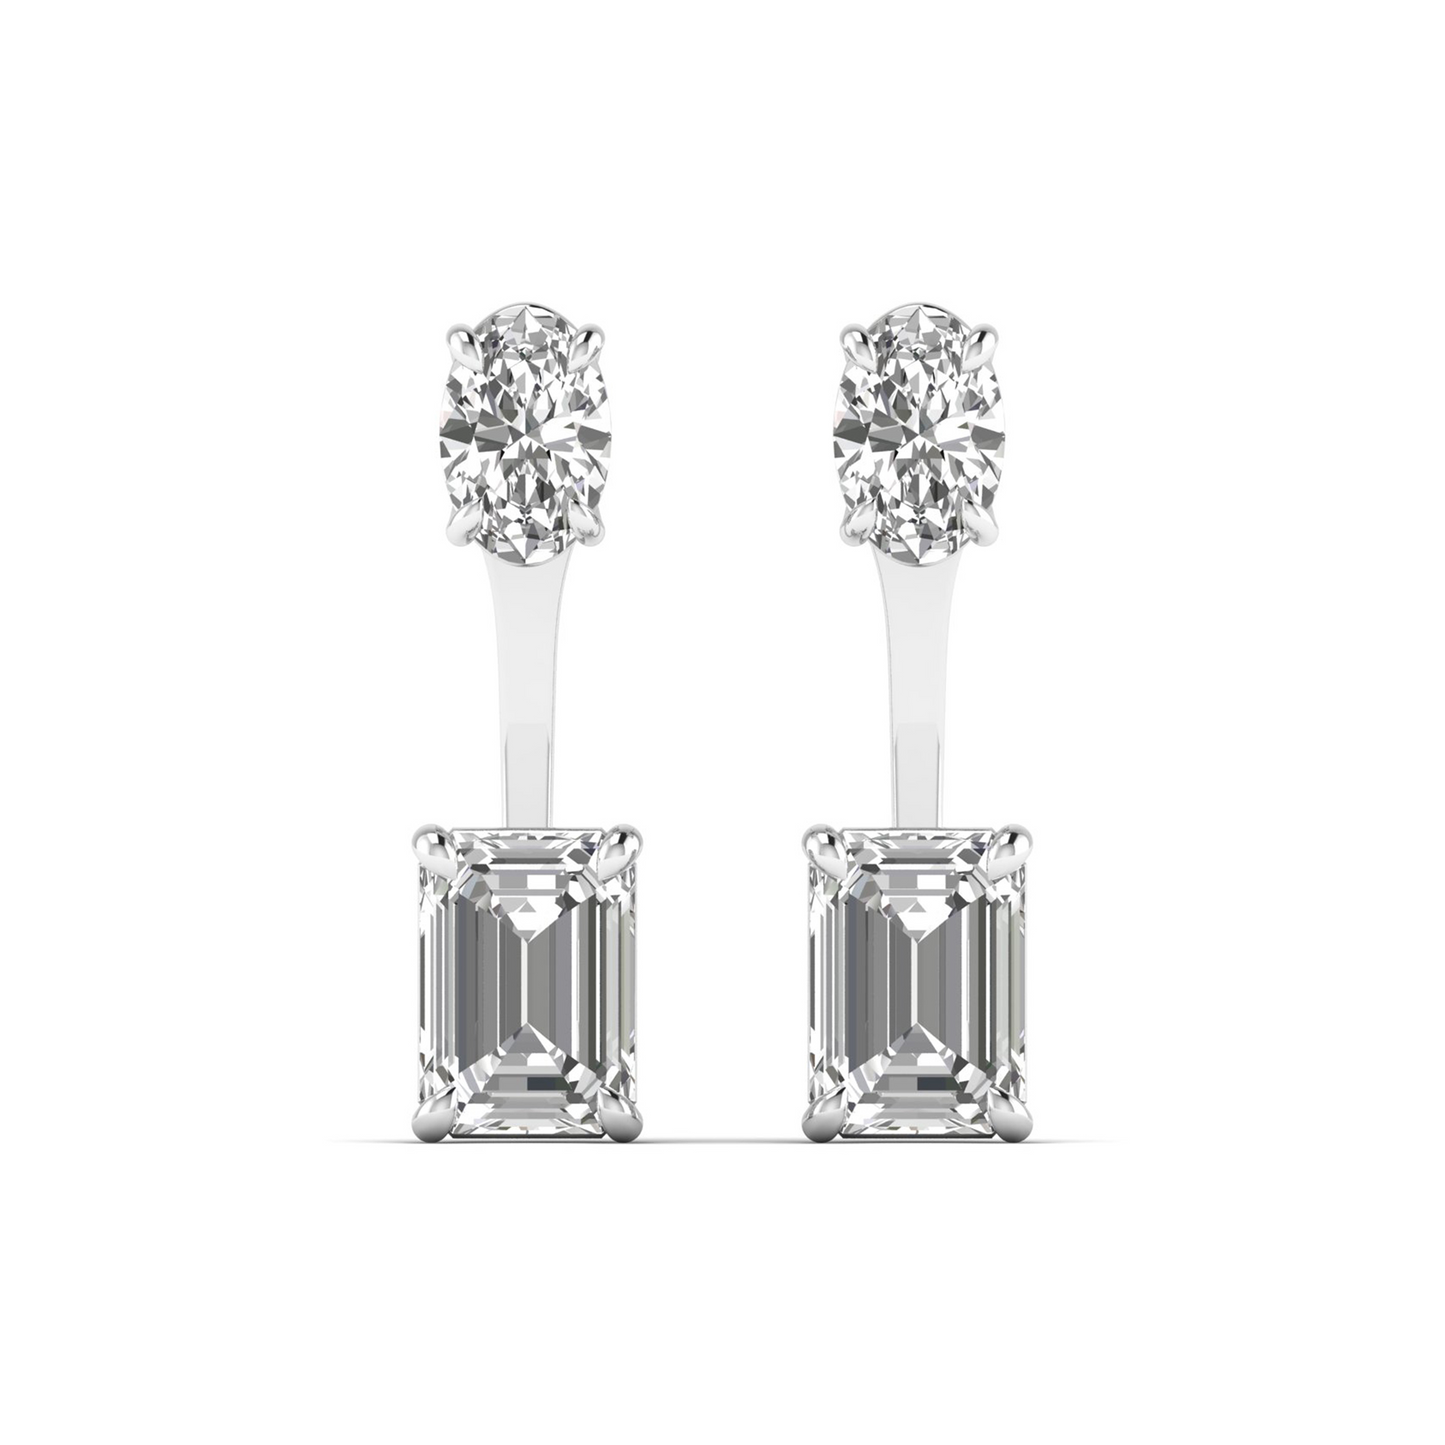 Radiant Glamour: Lab-Grown Diamond Earrings in Emerald and Oval Shapes – Ethical Elegance Beyond Compare!